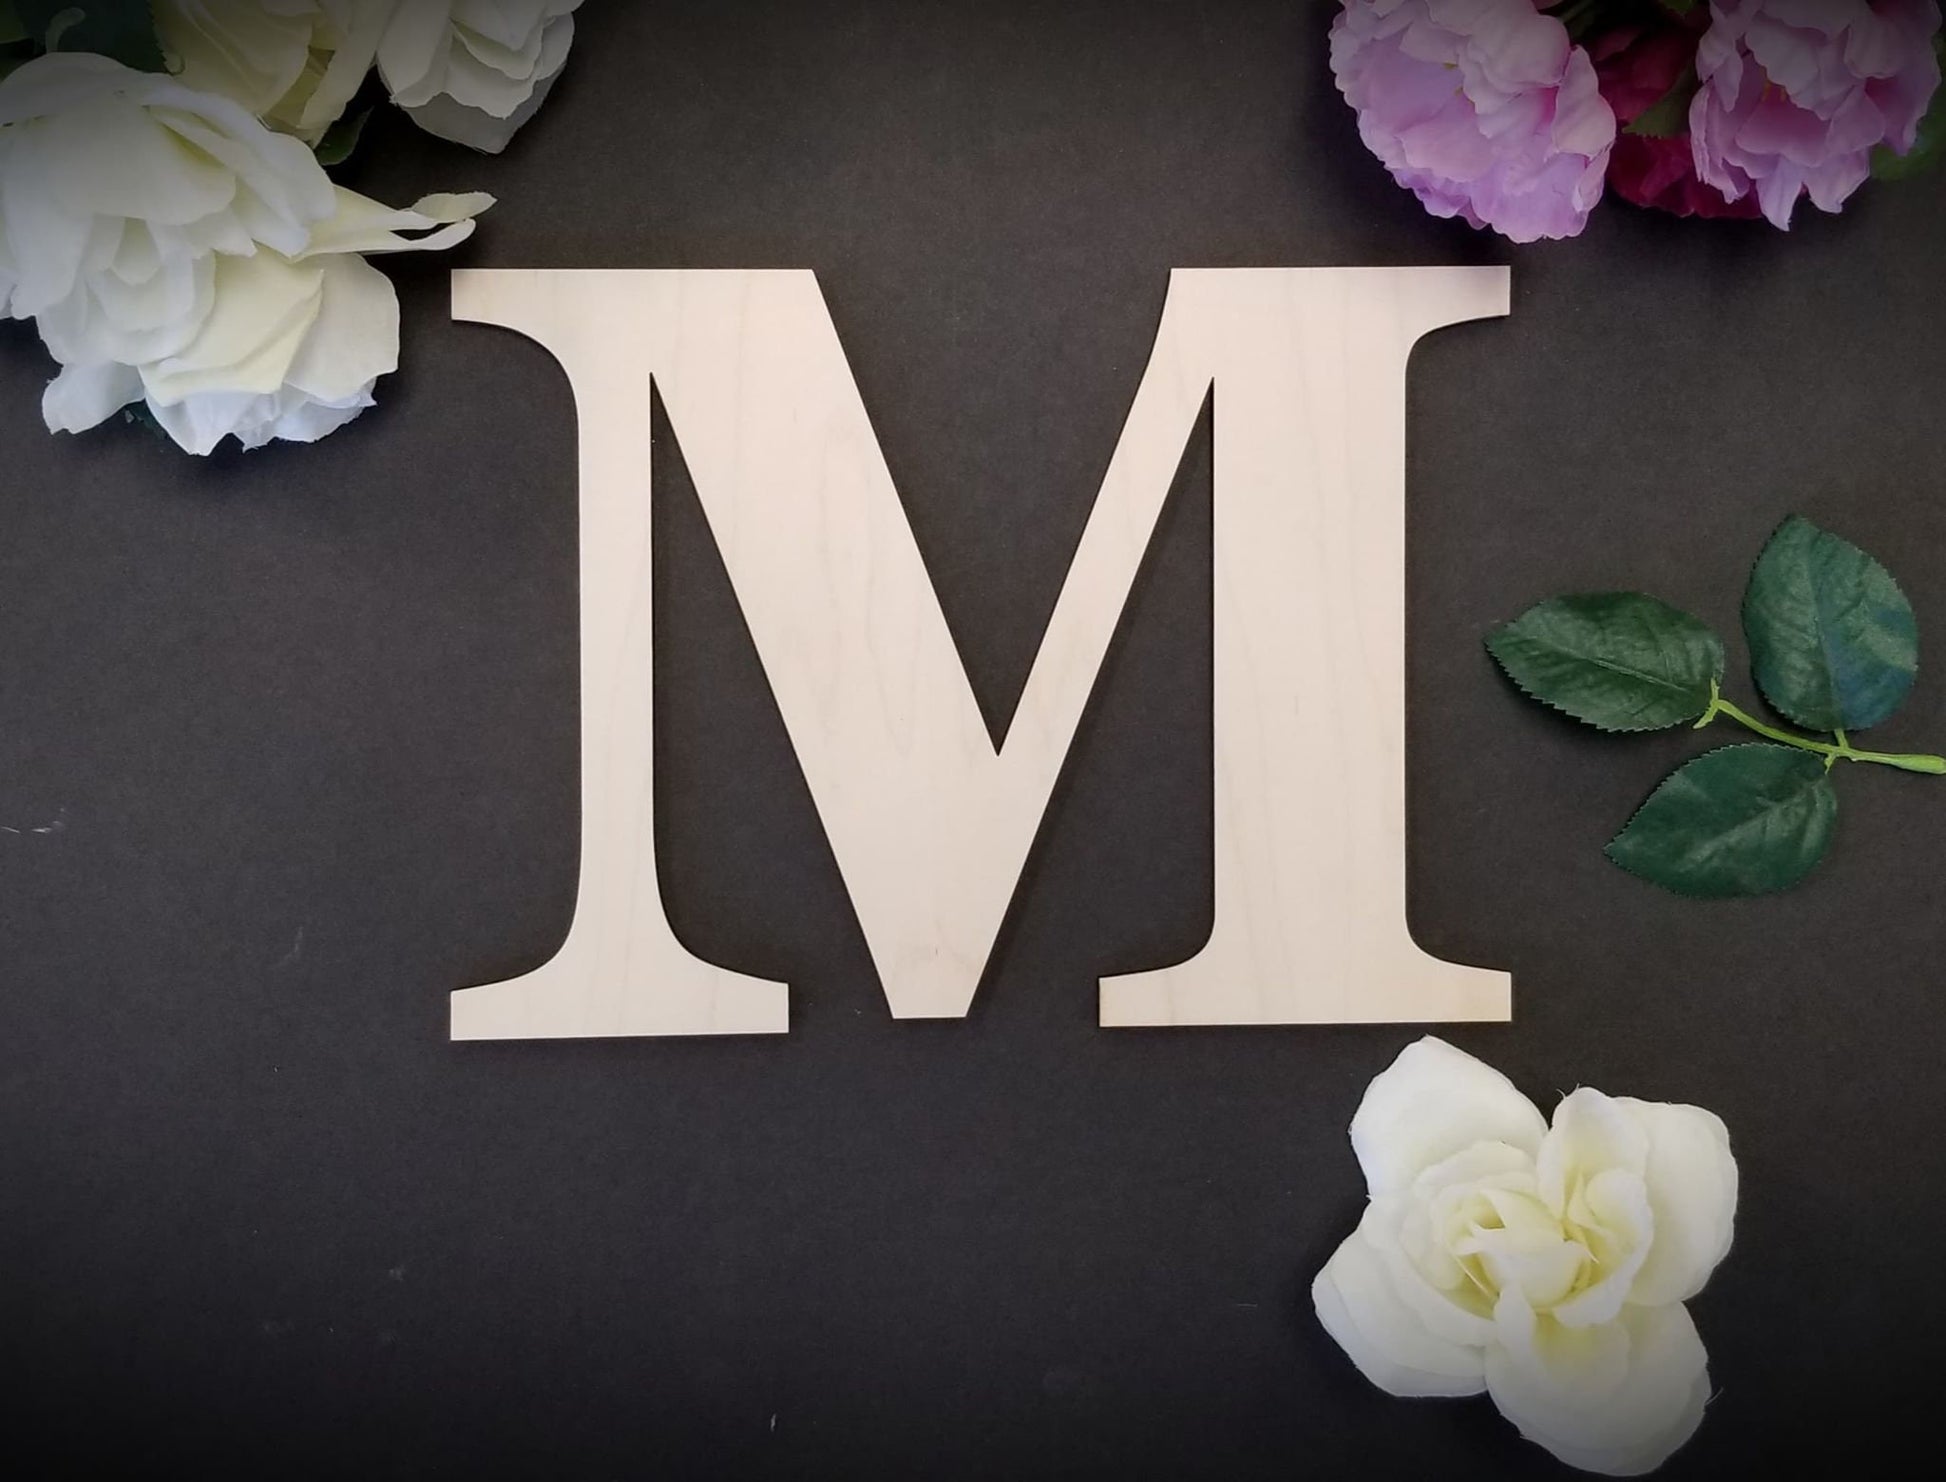 How To Make Wooden Letters For Walls with X-Carve - Making Manzanita